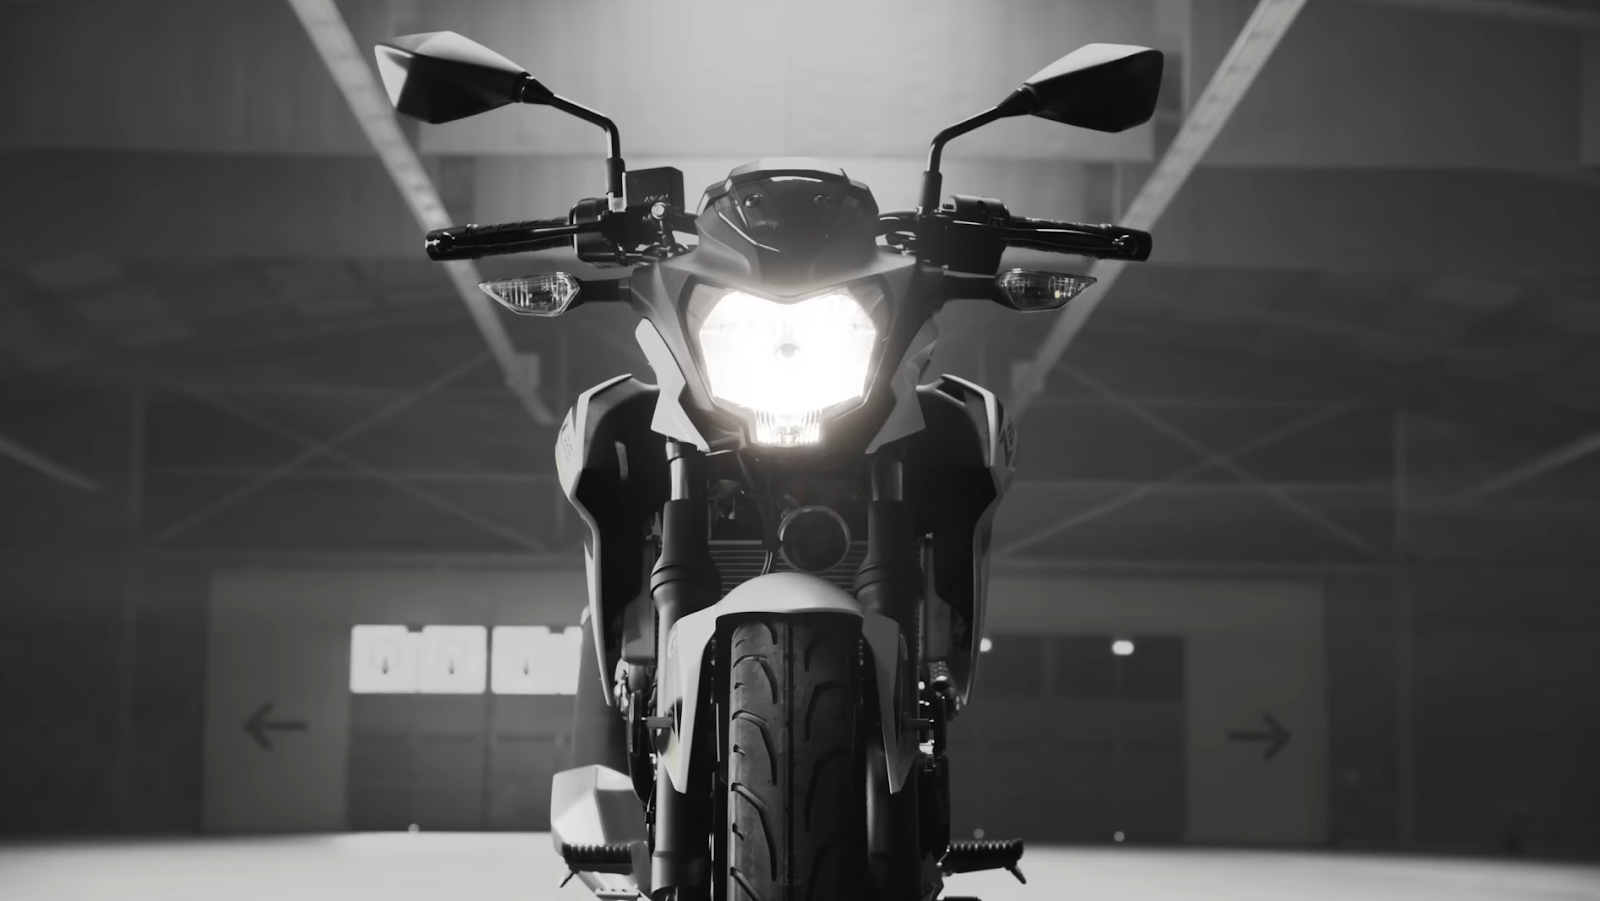 z125with turned light on in the garage - black and white photo